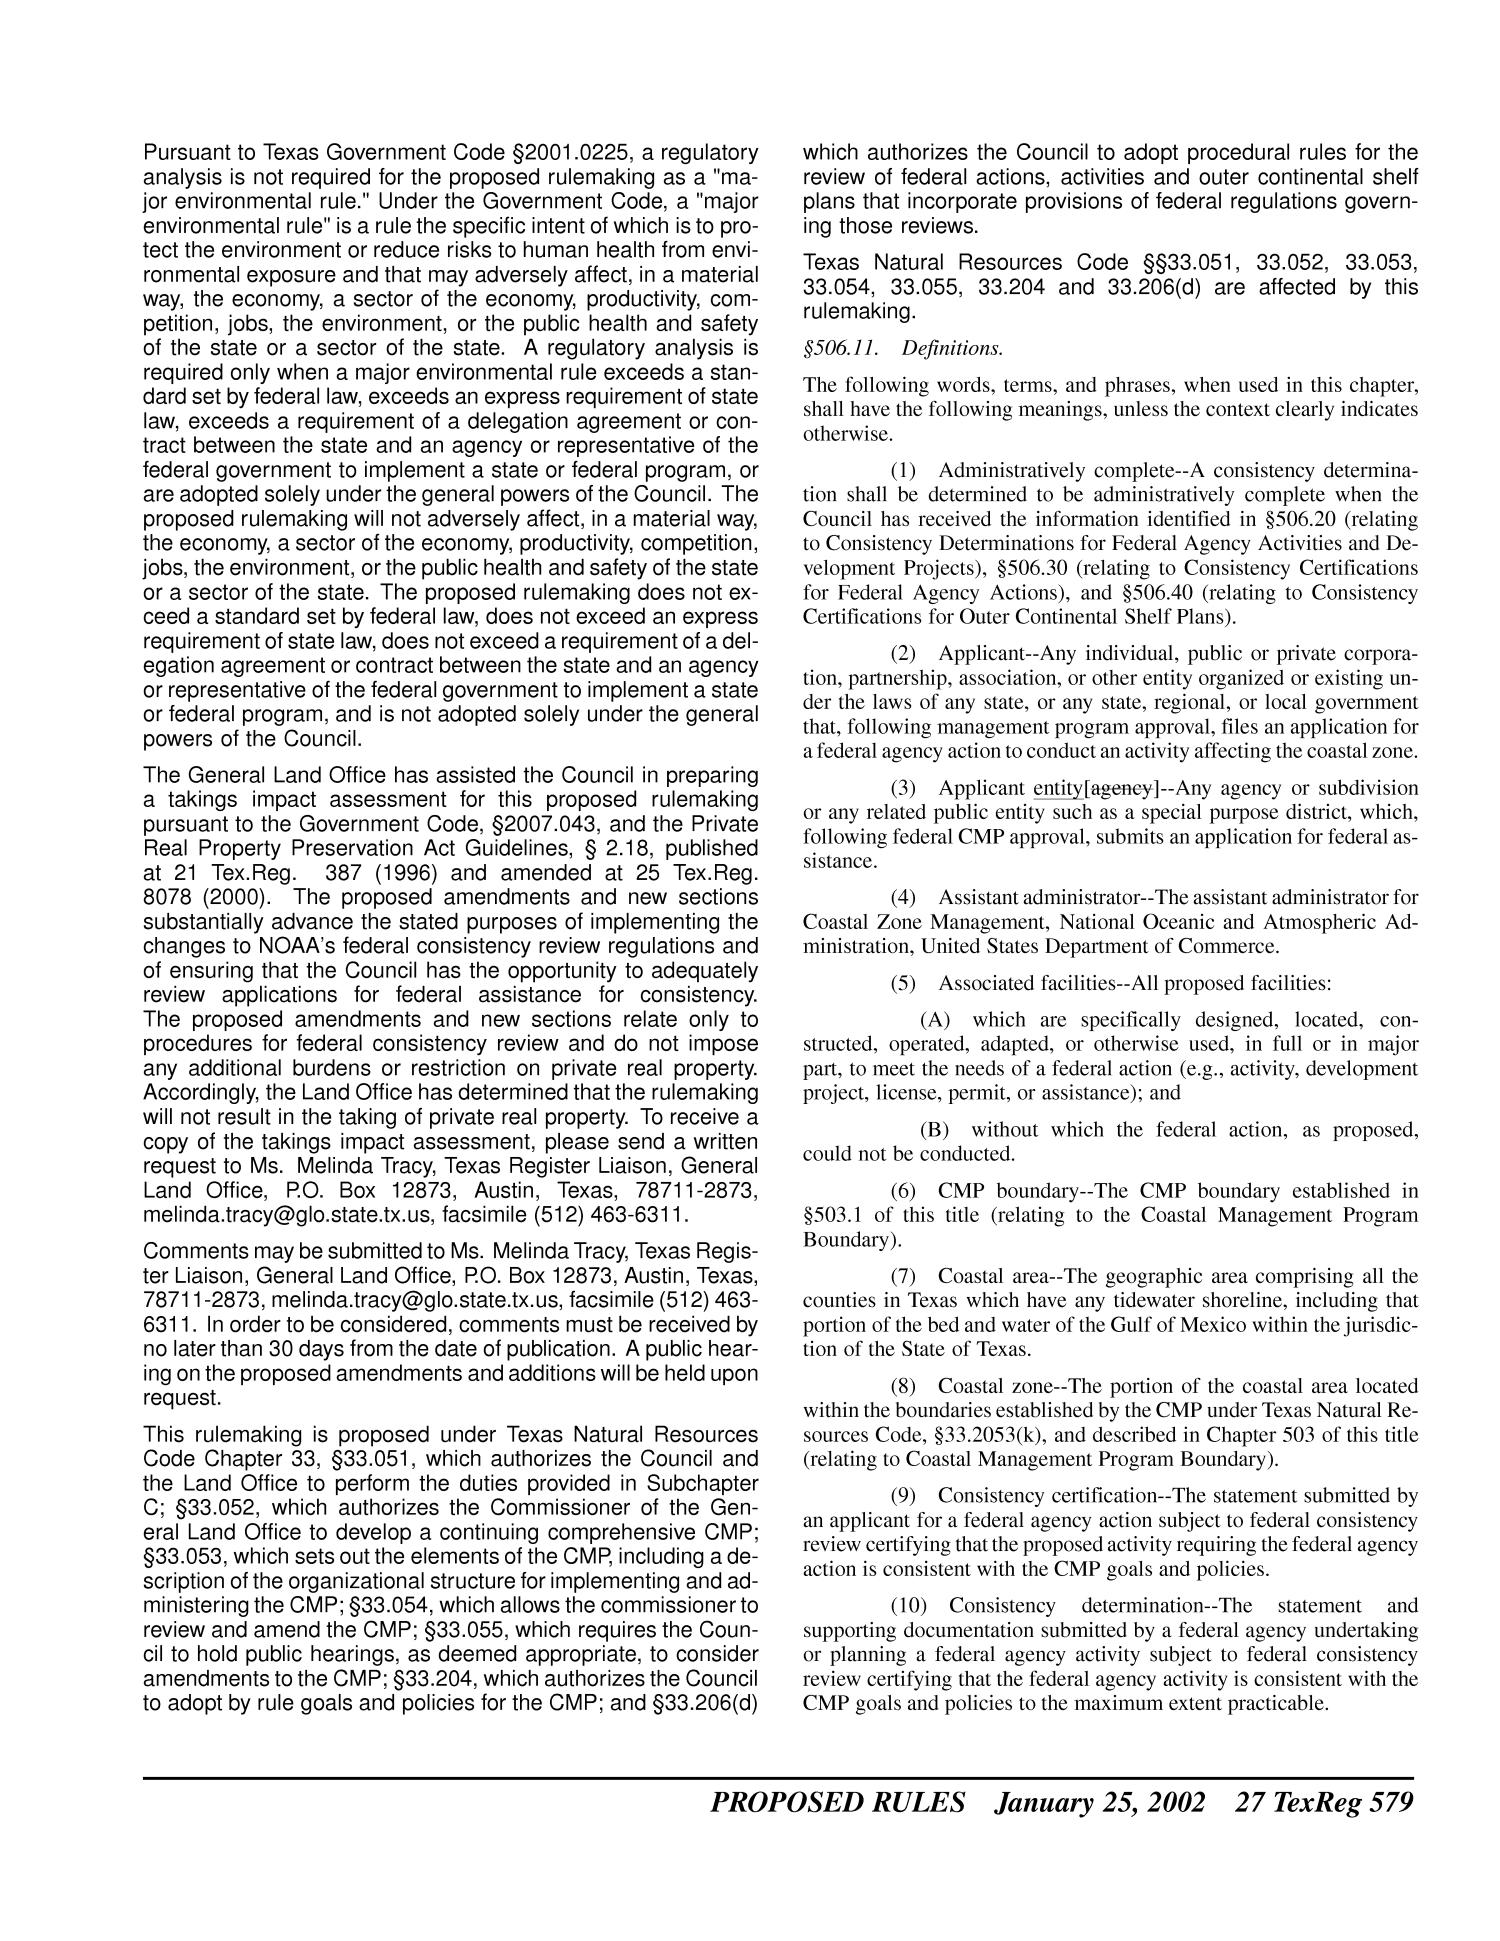 Texas Register, Volume 27, Number 4, Pages 529-656, January 25, 2002
                                                
                                                    579
                                                